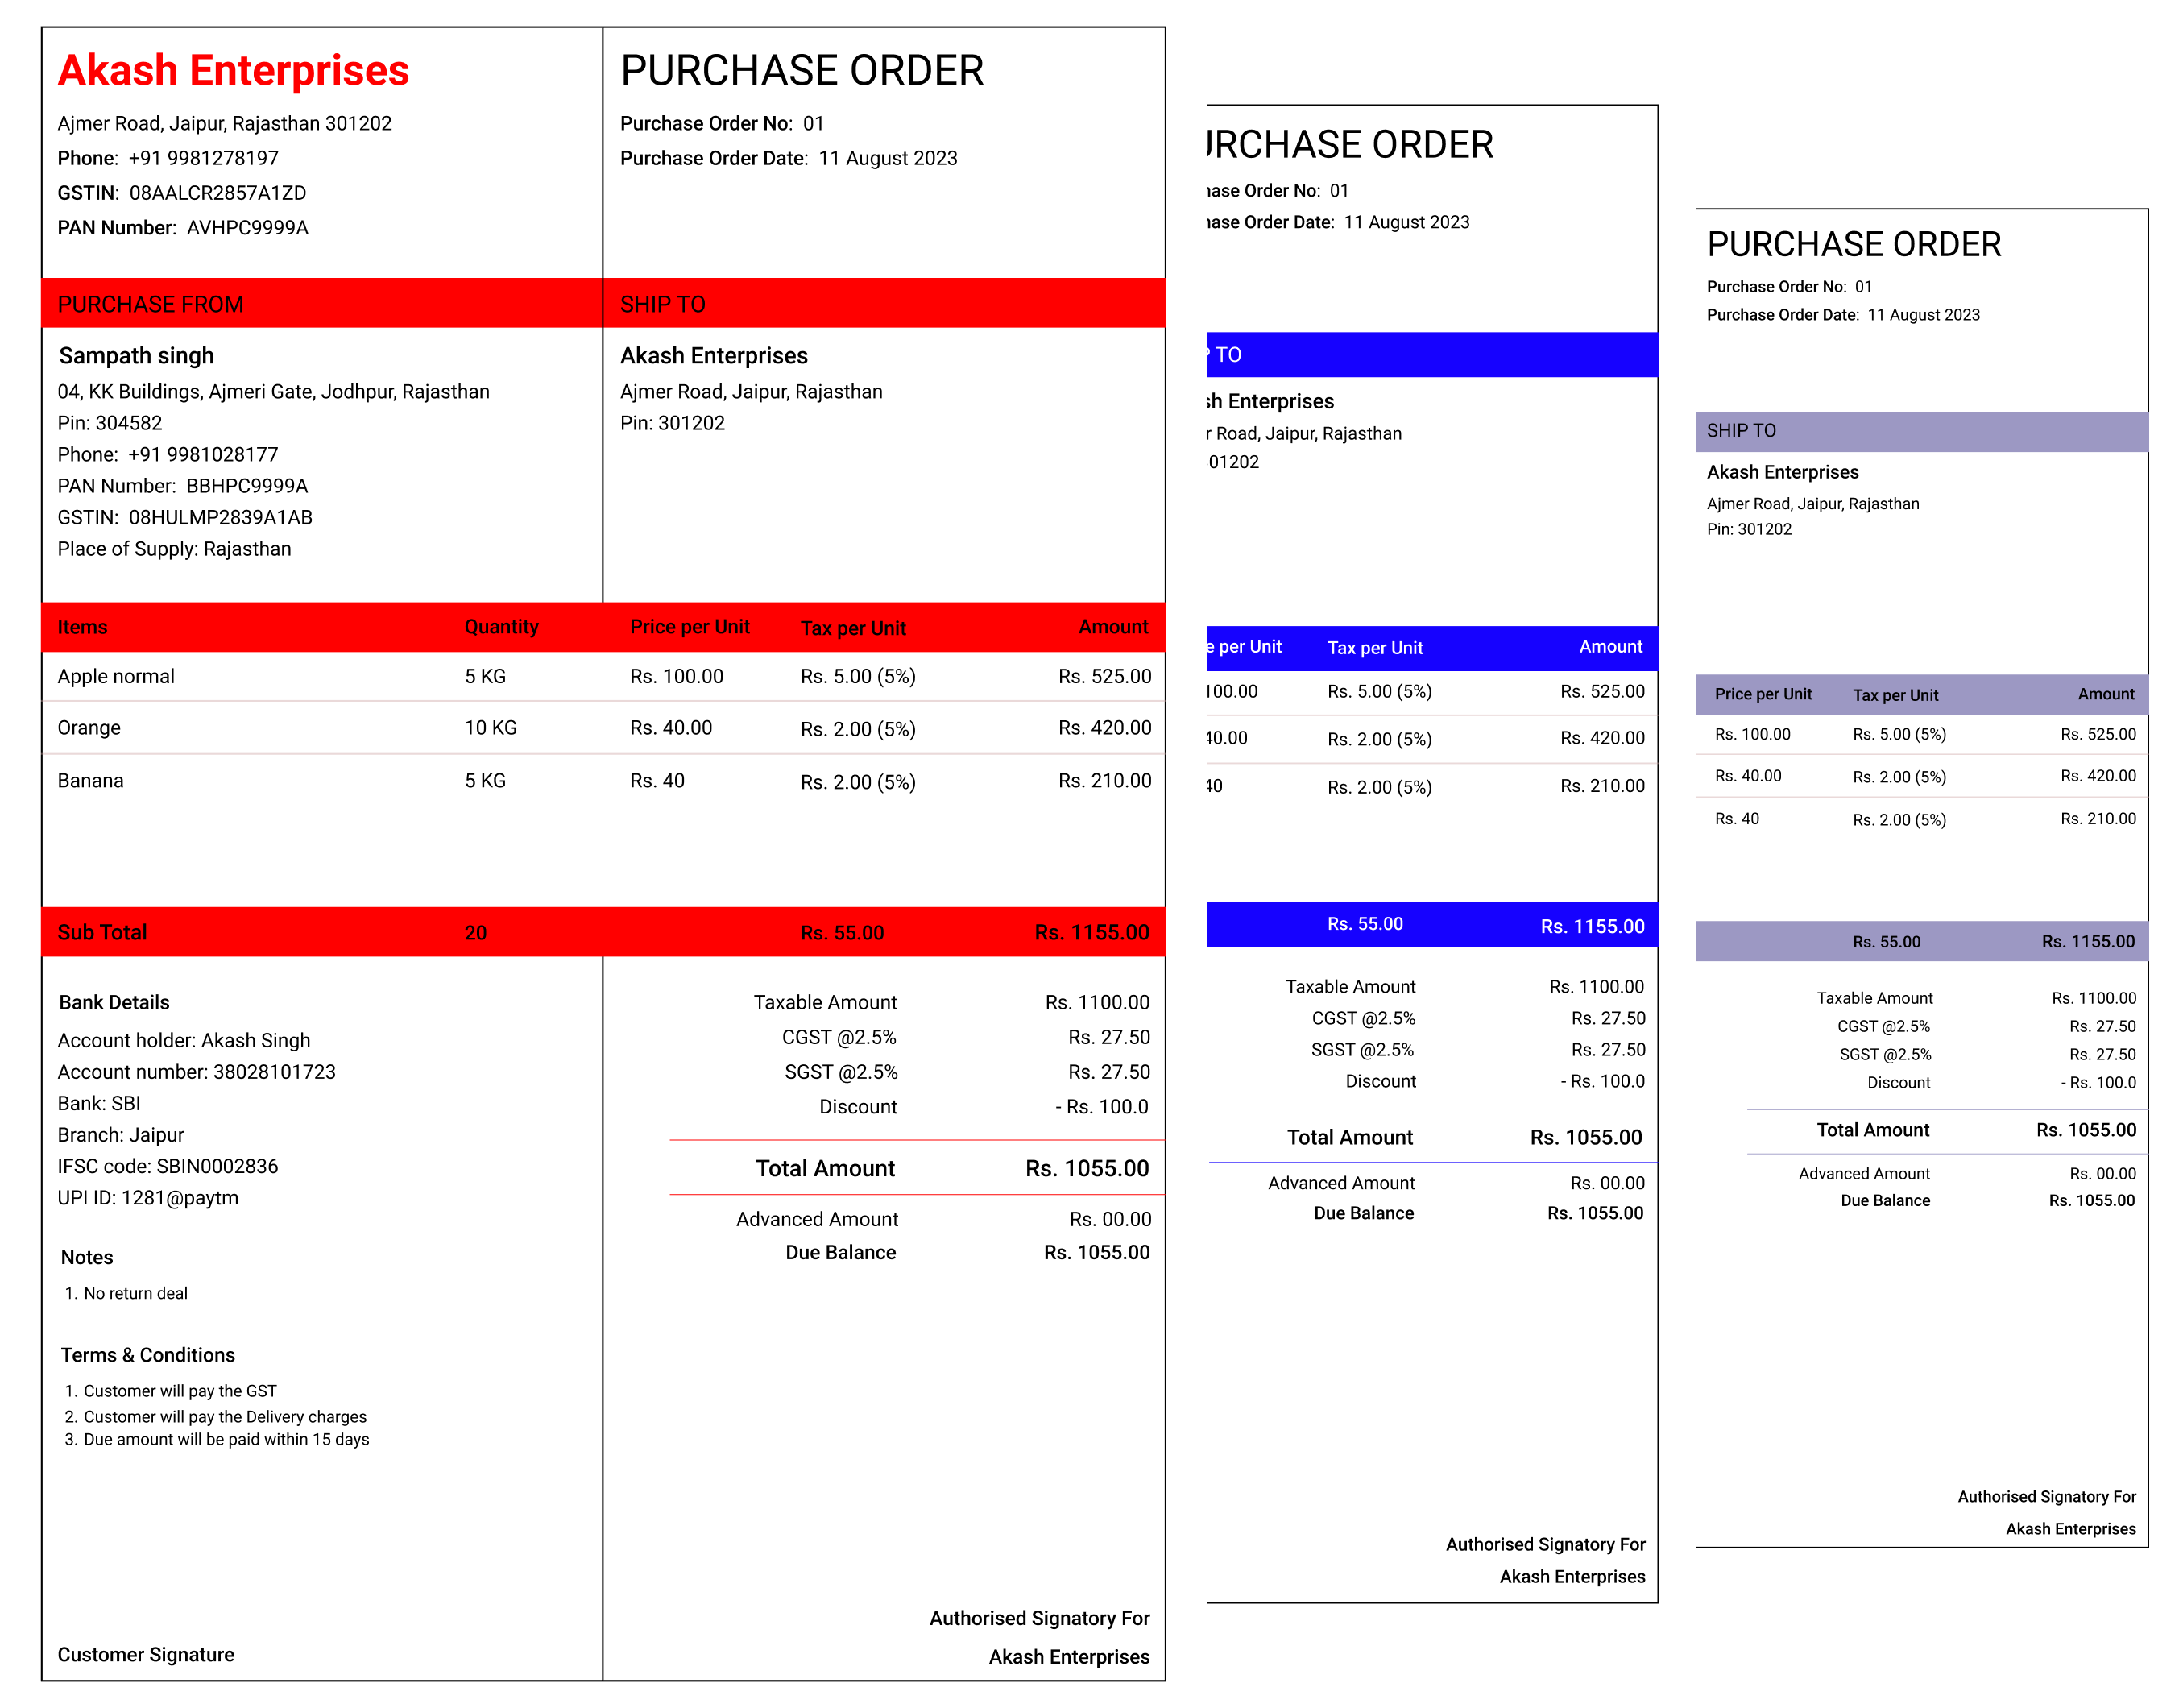 Free purchase order templates for small business to create professional purchase order